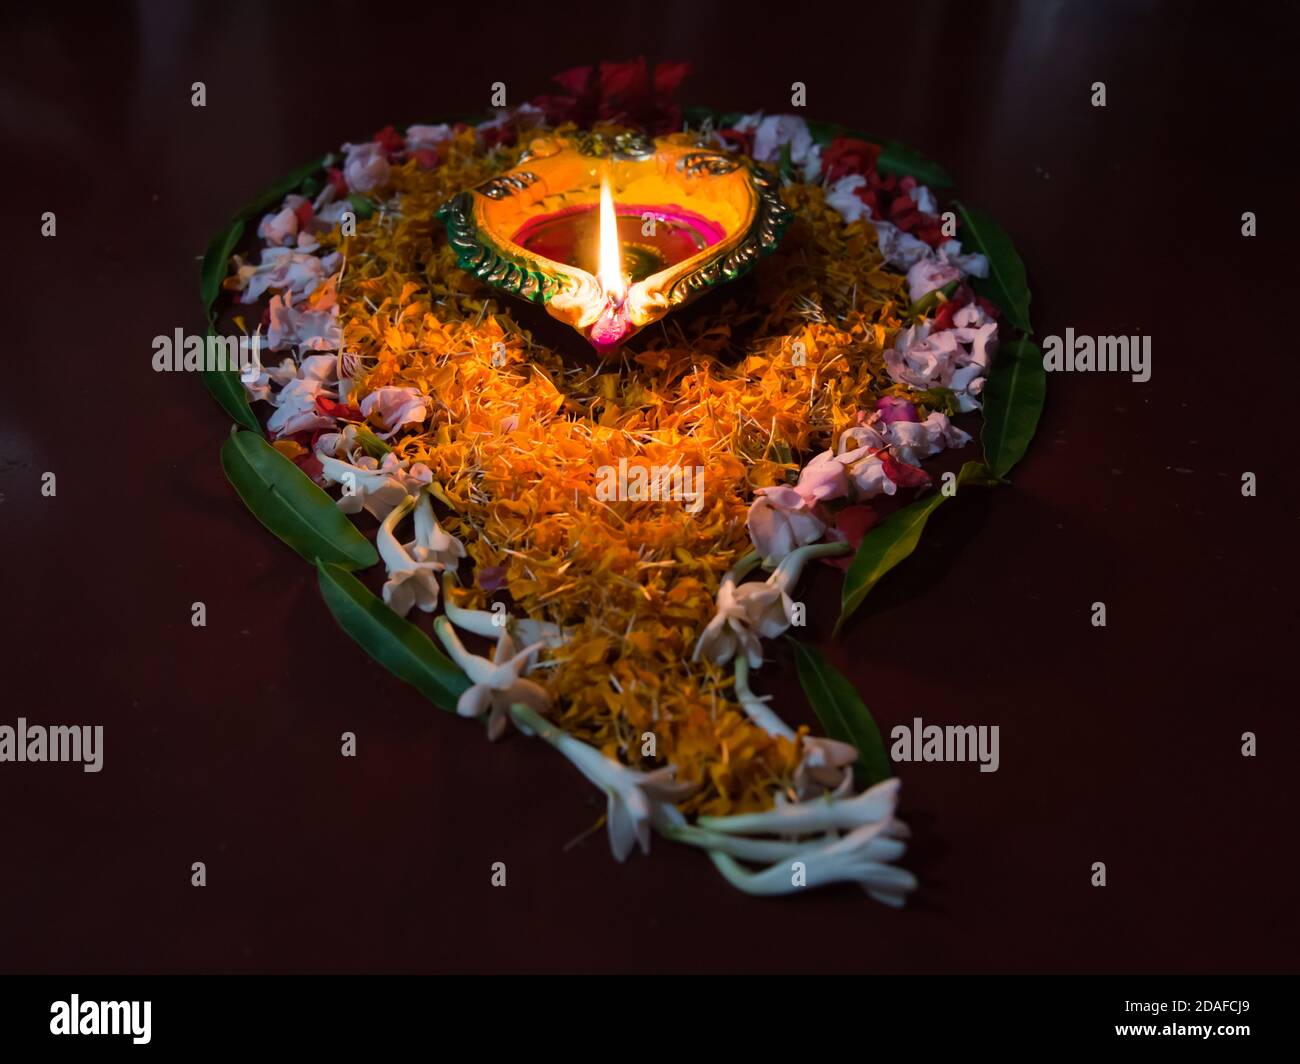 Diya or lamps along with floral decorations for the occasion of Diwali Stock Photo